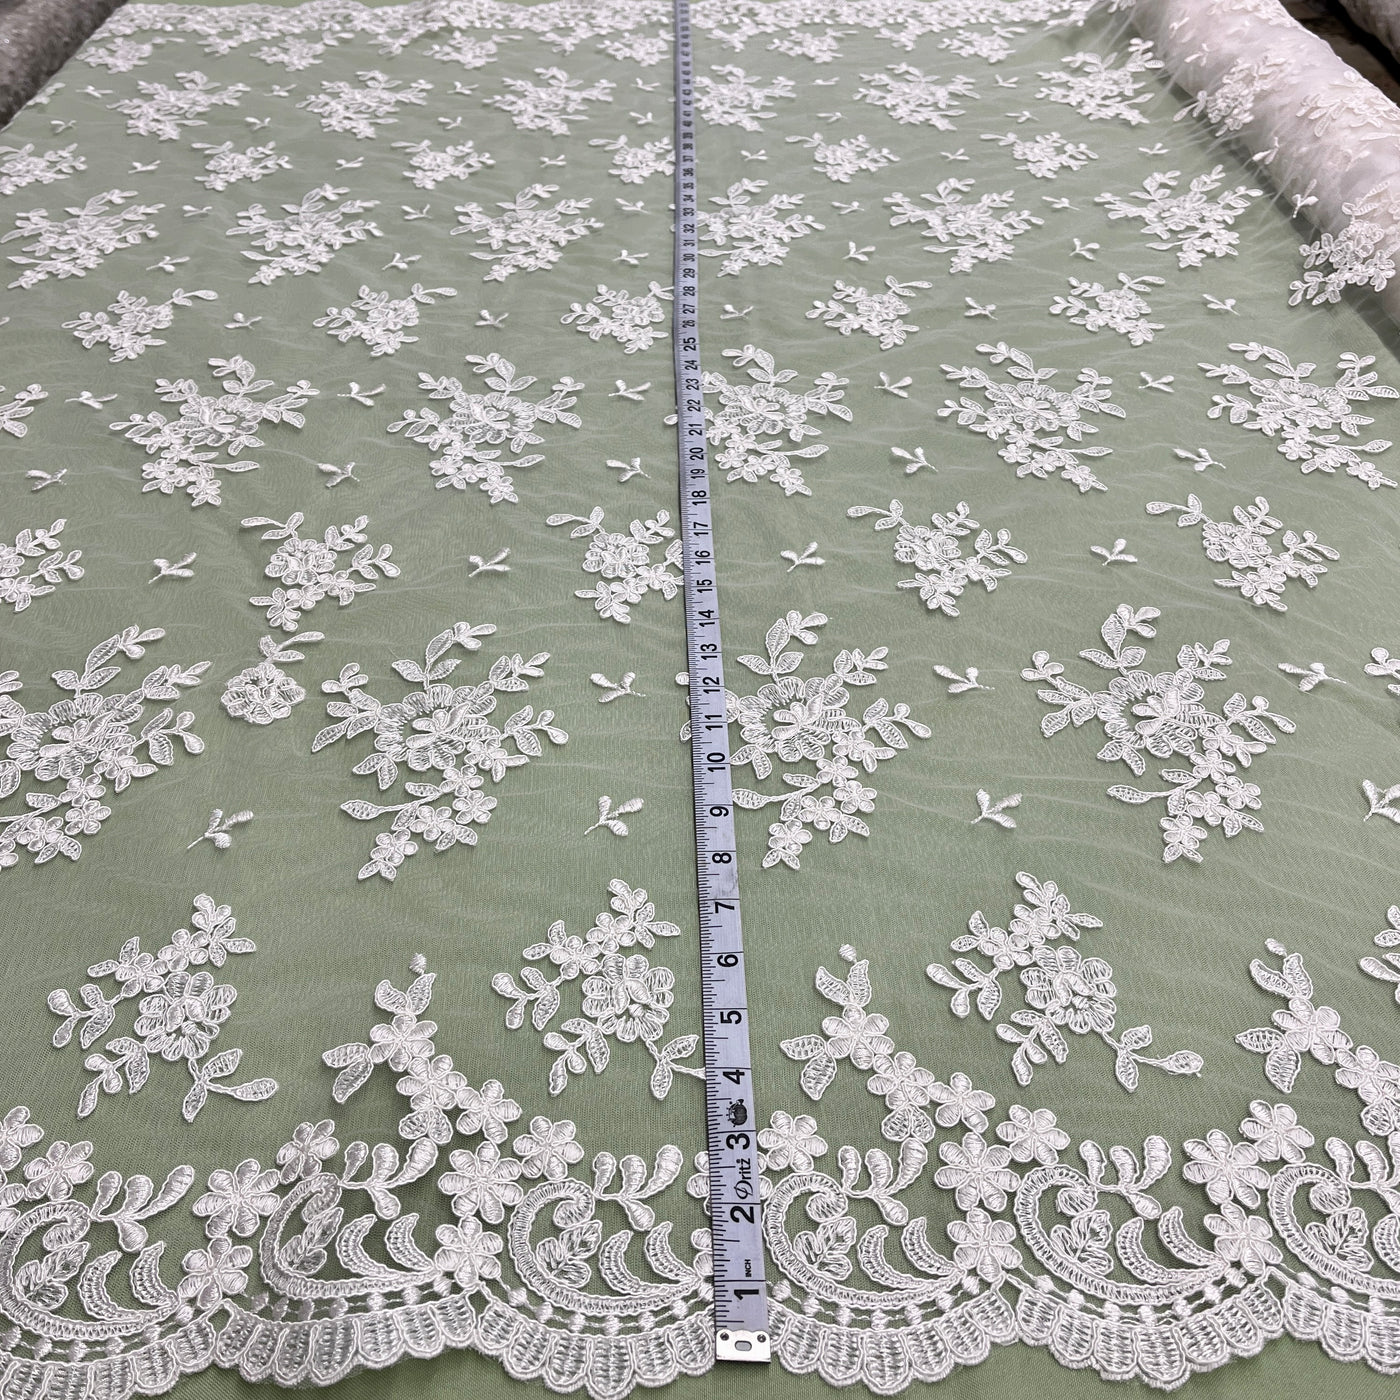 Corded Bridal Lace Fabric Embroidered on 100% Polyester Net Mesh | Lace USA - 91436W